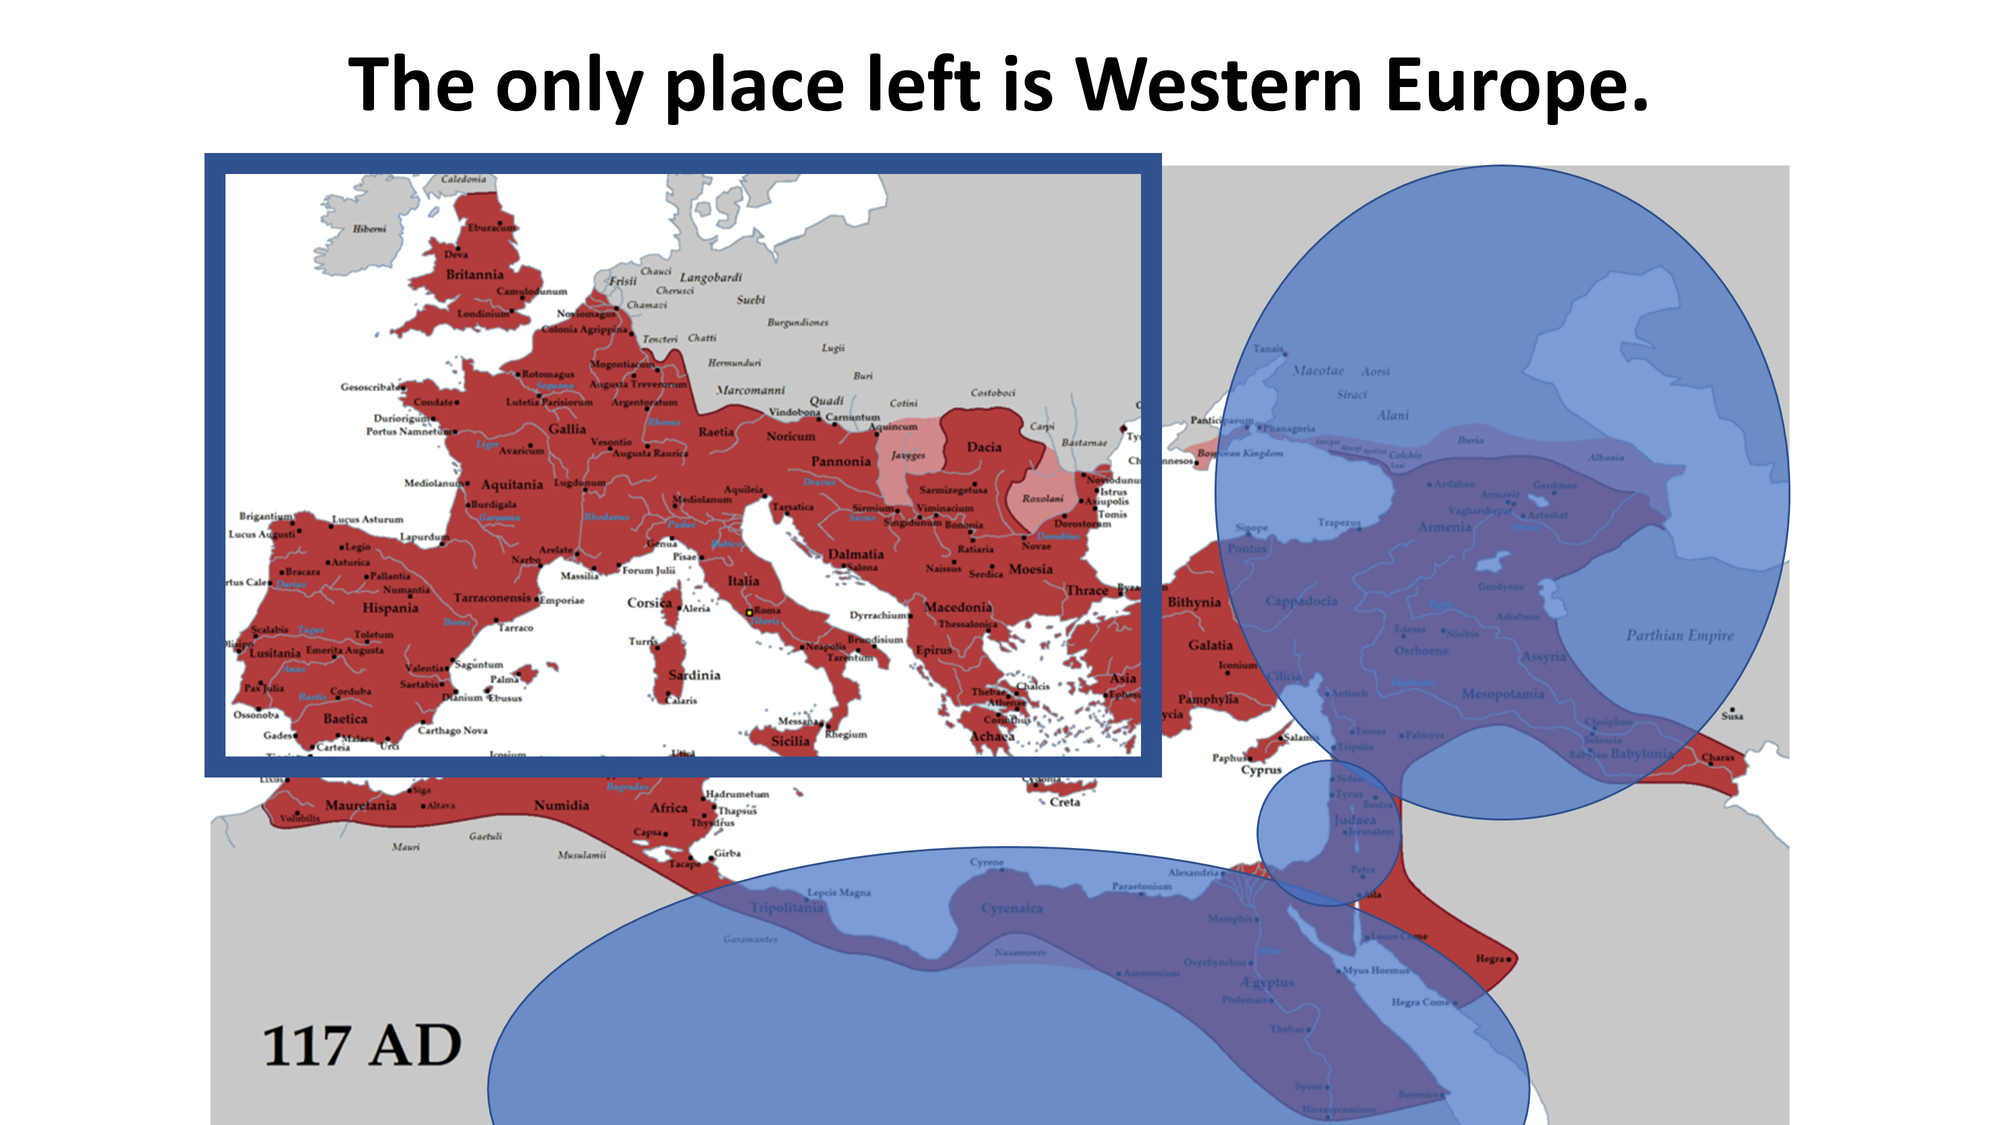 Antichrist's enemies in blue. Therefore, his military home-base is in Western Europe.